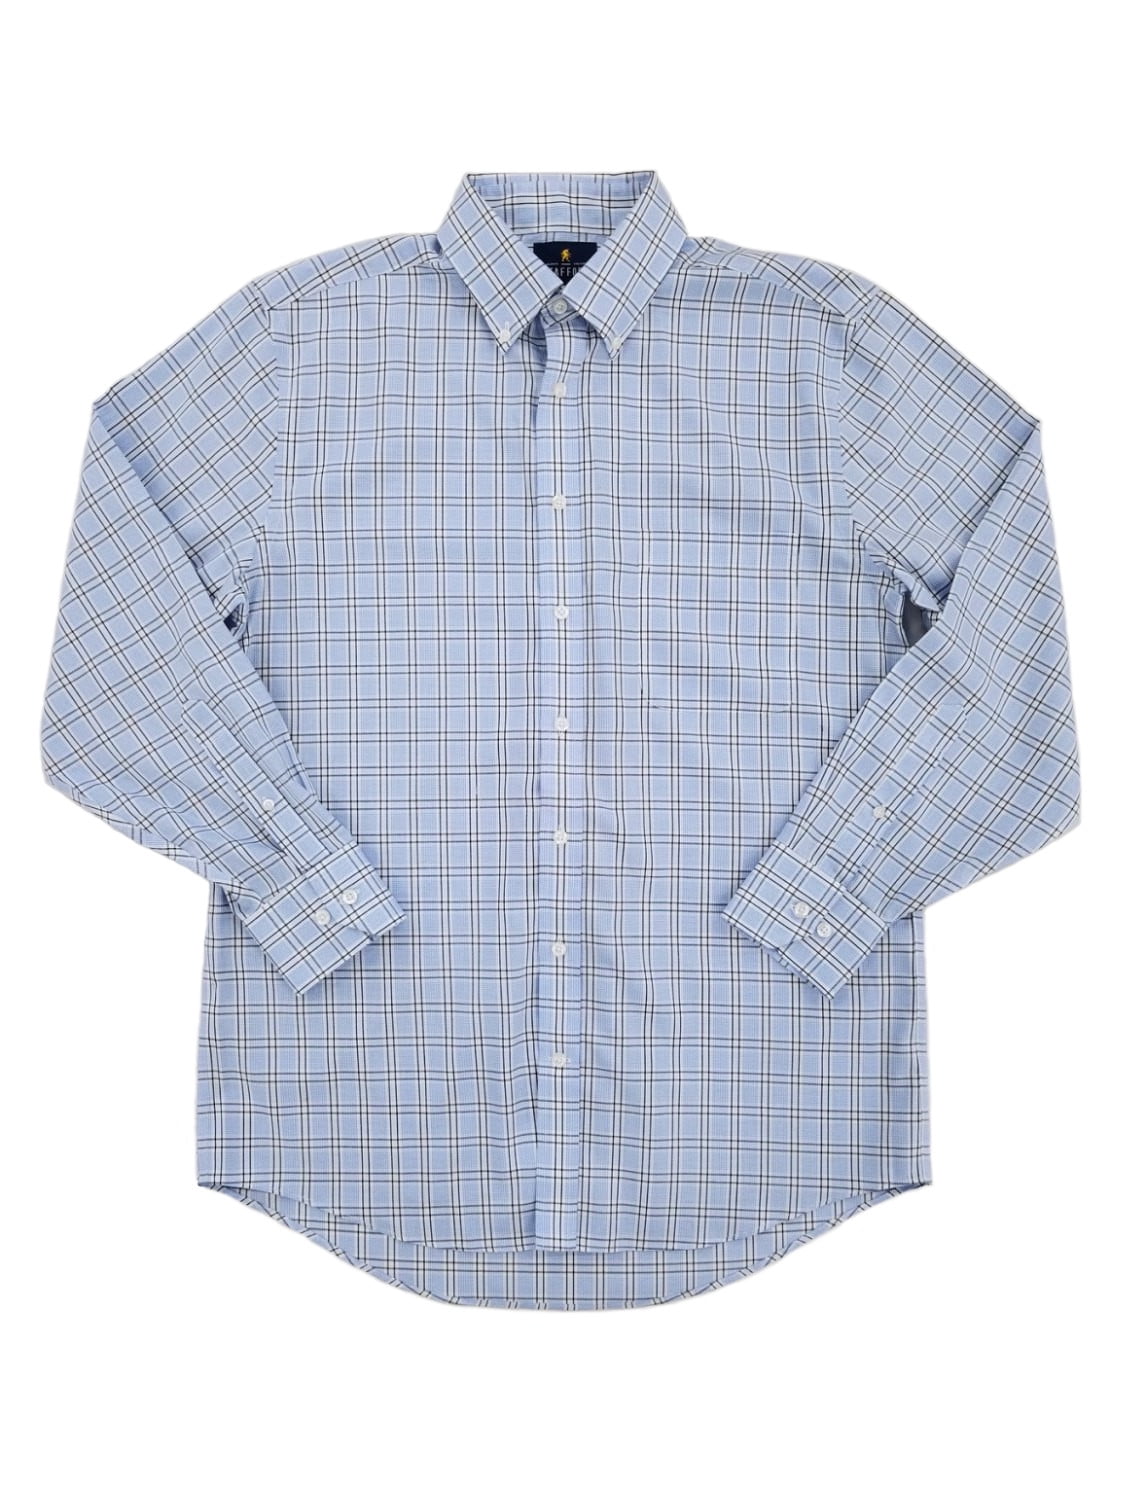 Mens Blue Window Grid Executive Pinpoint Oxford Button-Down Shirt 15 / ...